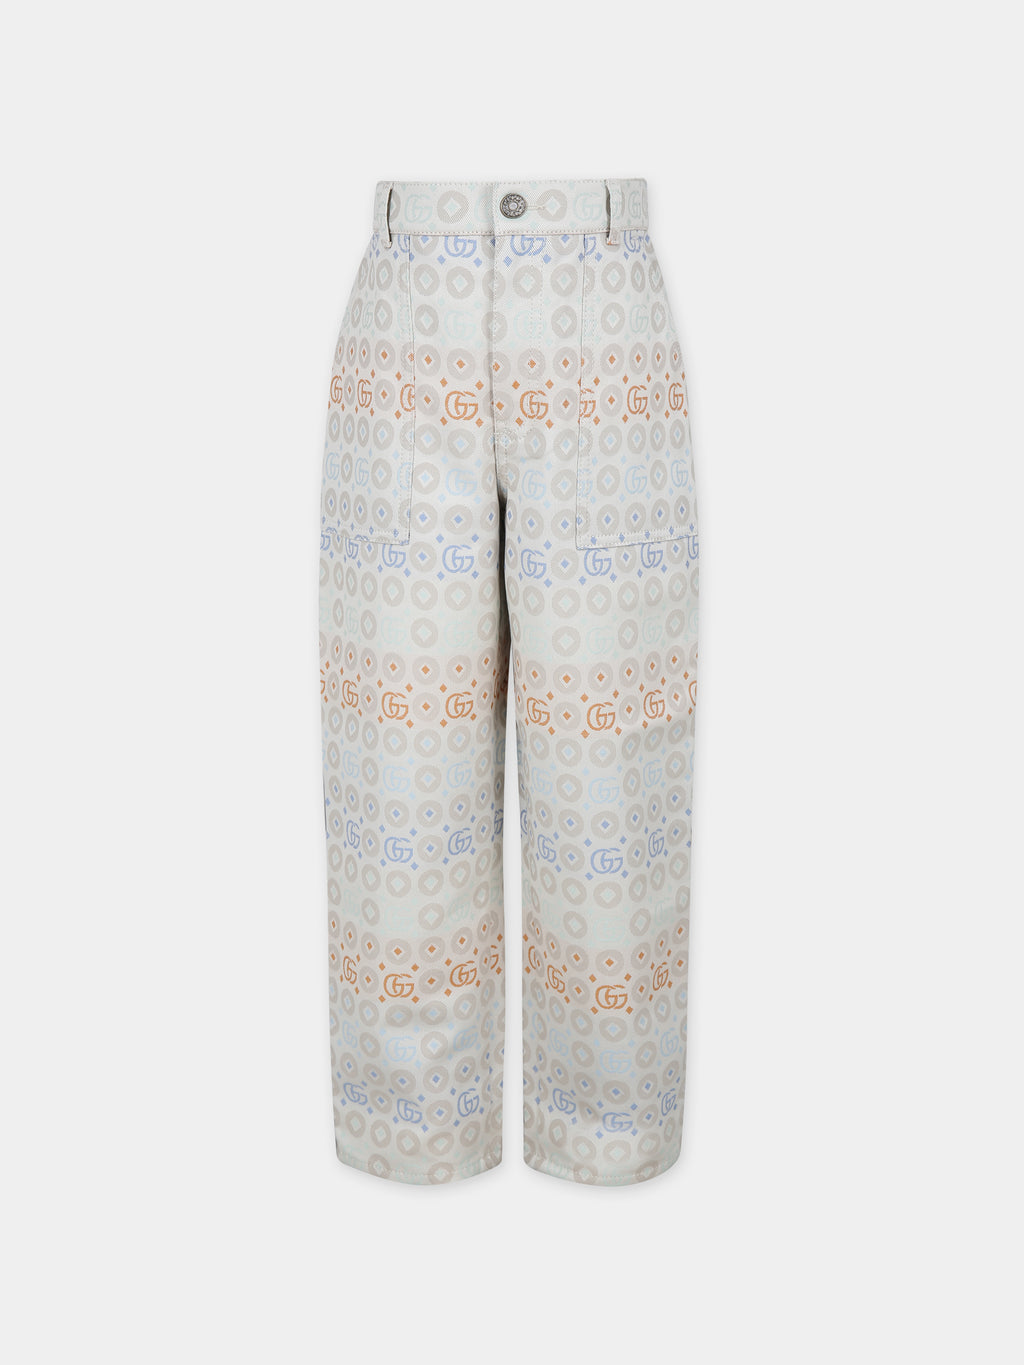 Ivory trousers for kids with double G